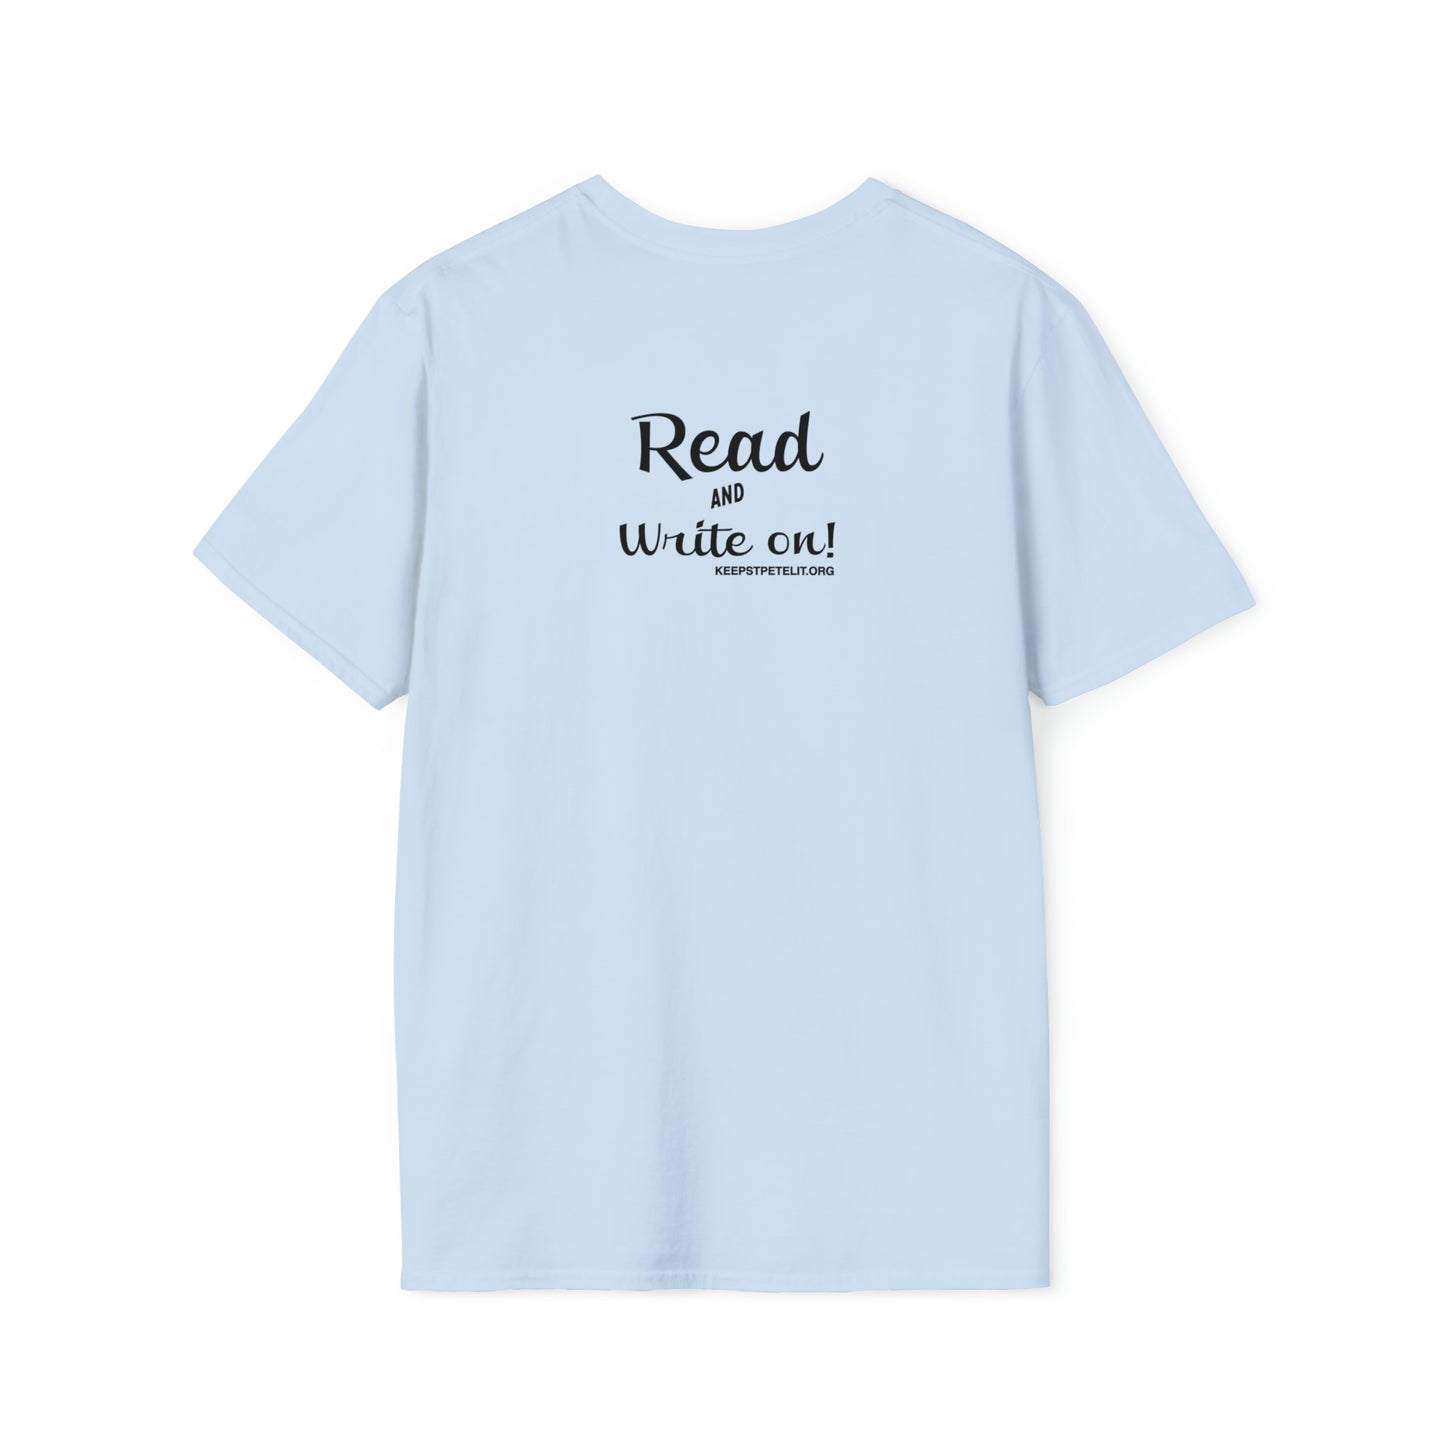 2-Sided "Well Read" Unisex Softstyle T-Shirt